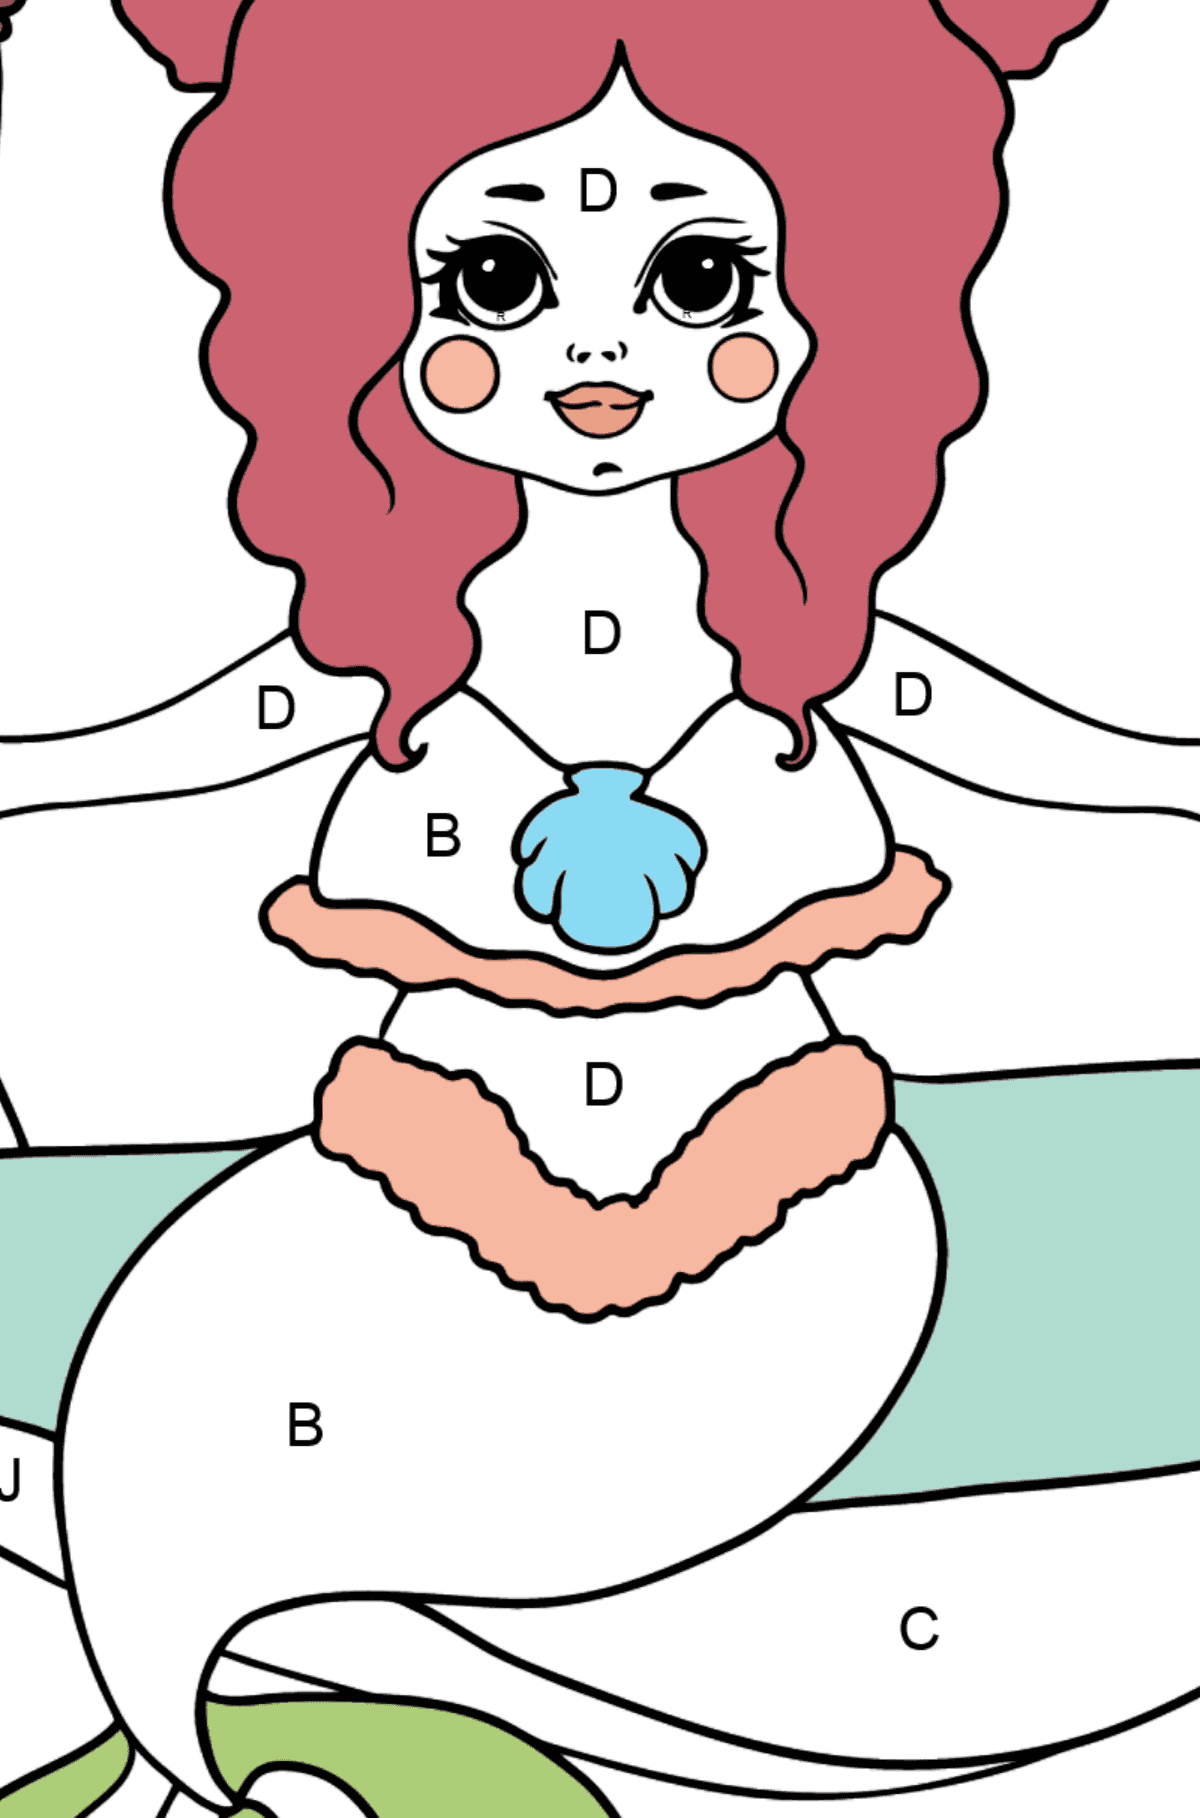 Mermaid and Two Fish coloring page - Coloring by Letters for Kids